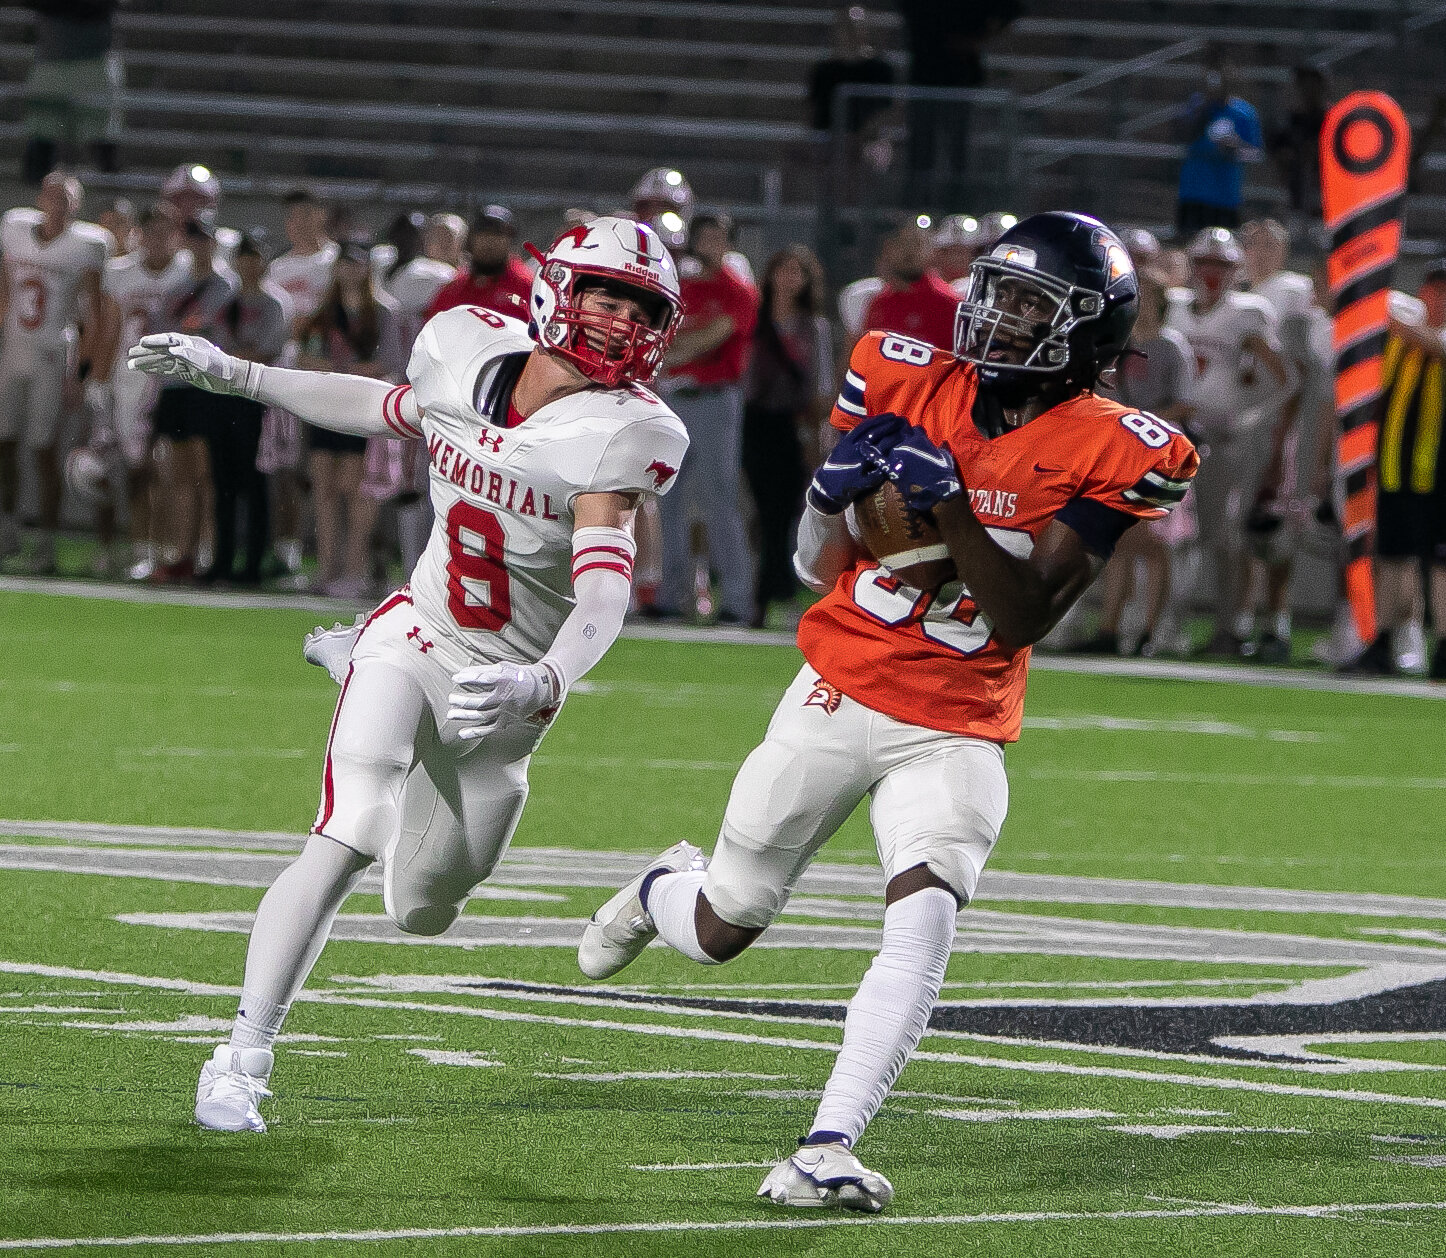 Ryan Fowler brings in a catch during Thursday's game between Seven Lakes and Memorial at Legacy Stadium.